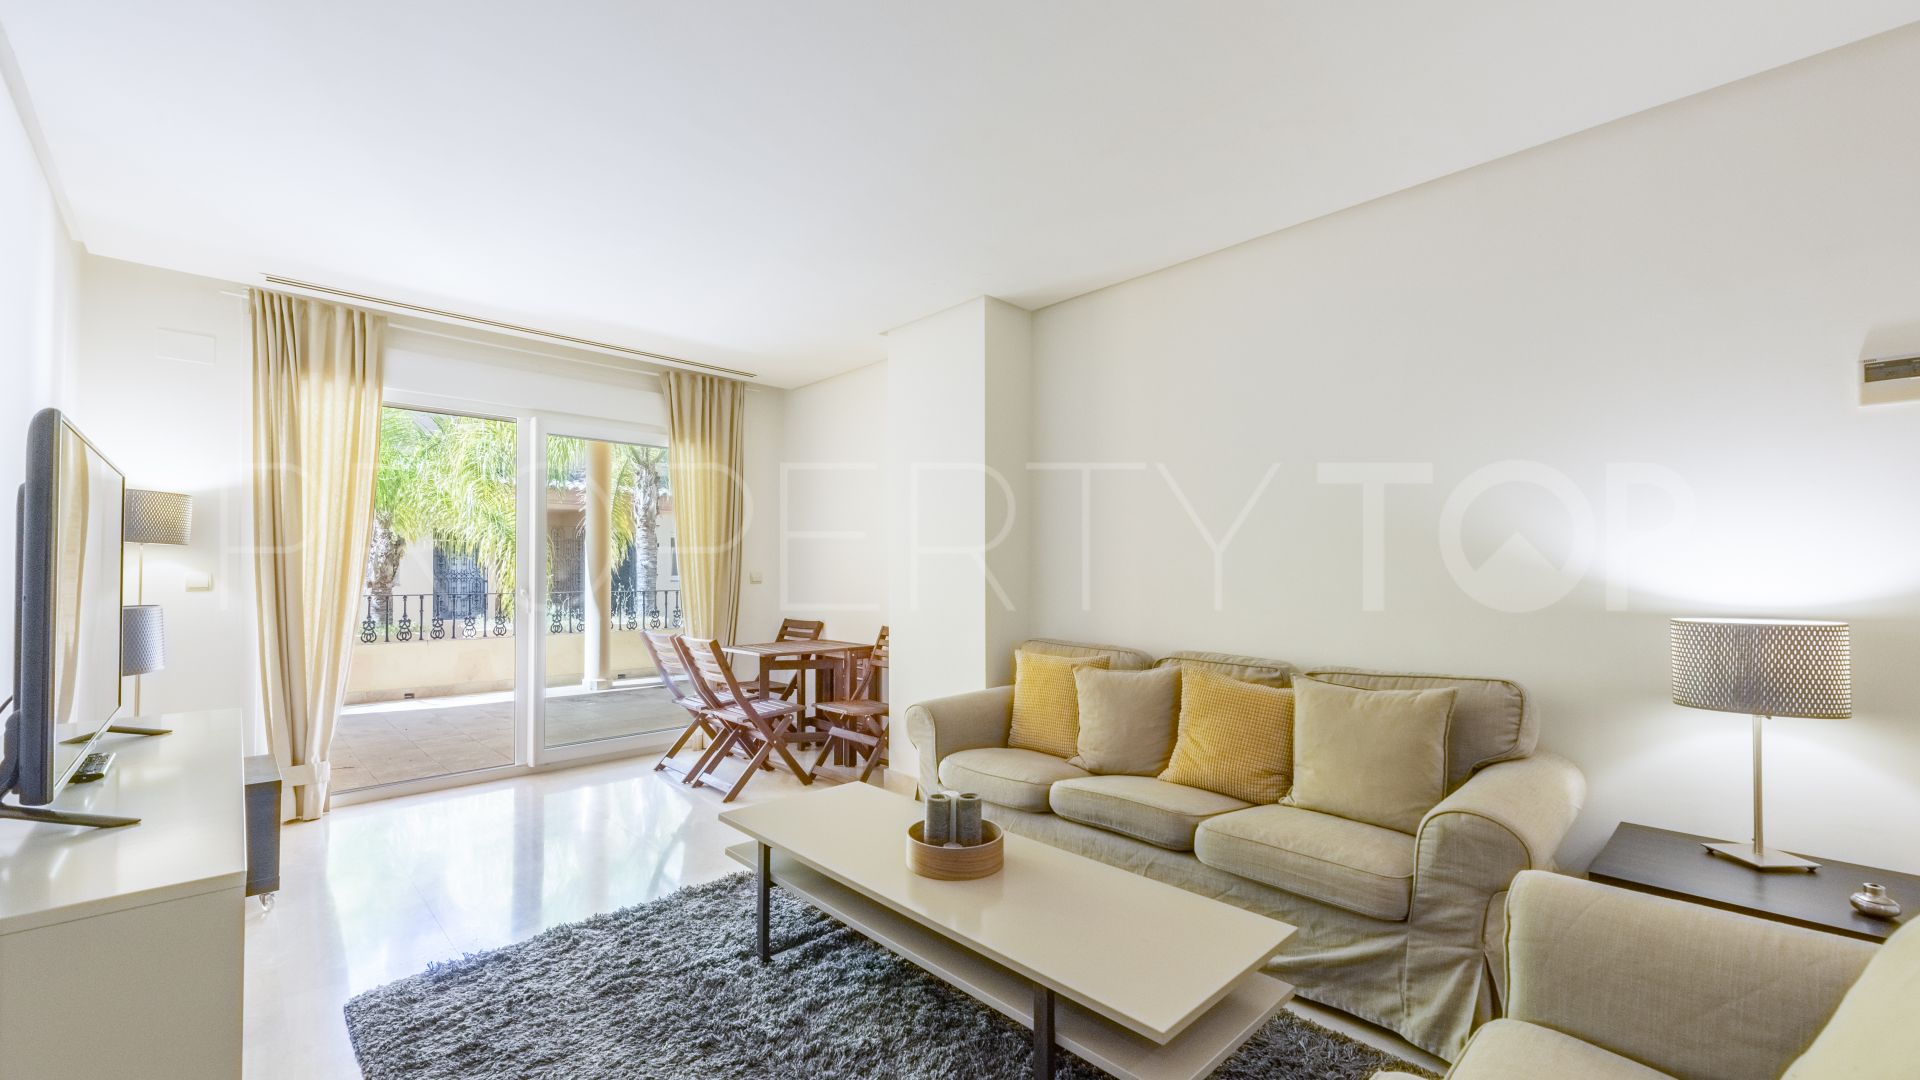 For sale 1 bedroom ground floor apartment in Vista Real